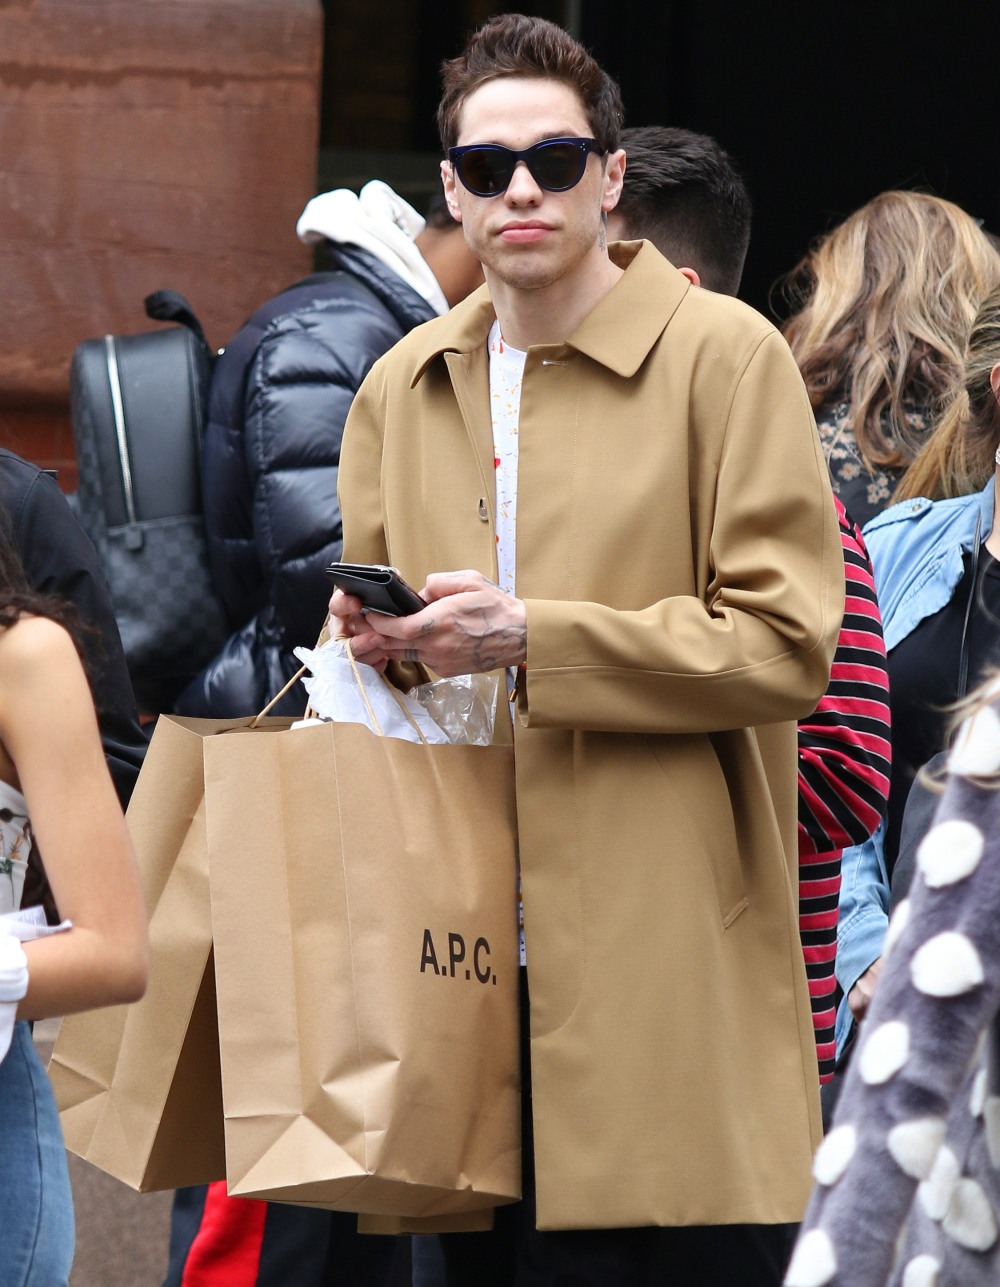 Pete Davidson checks his phone as he spends the afternoon shopping with friends around Manhattan's Soho area